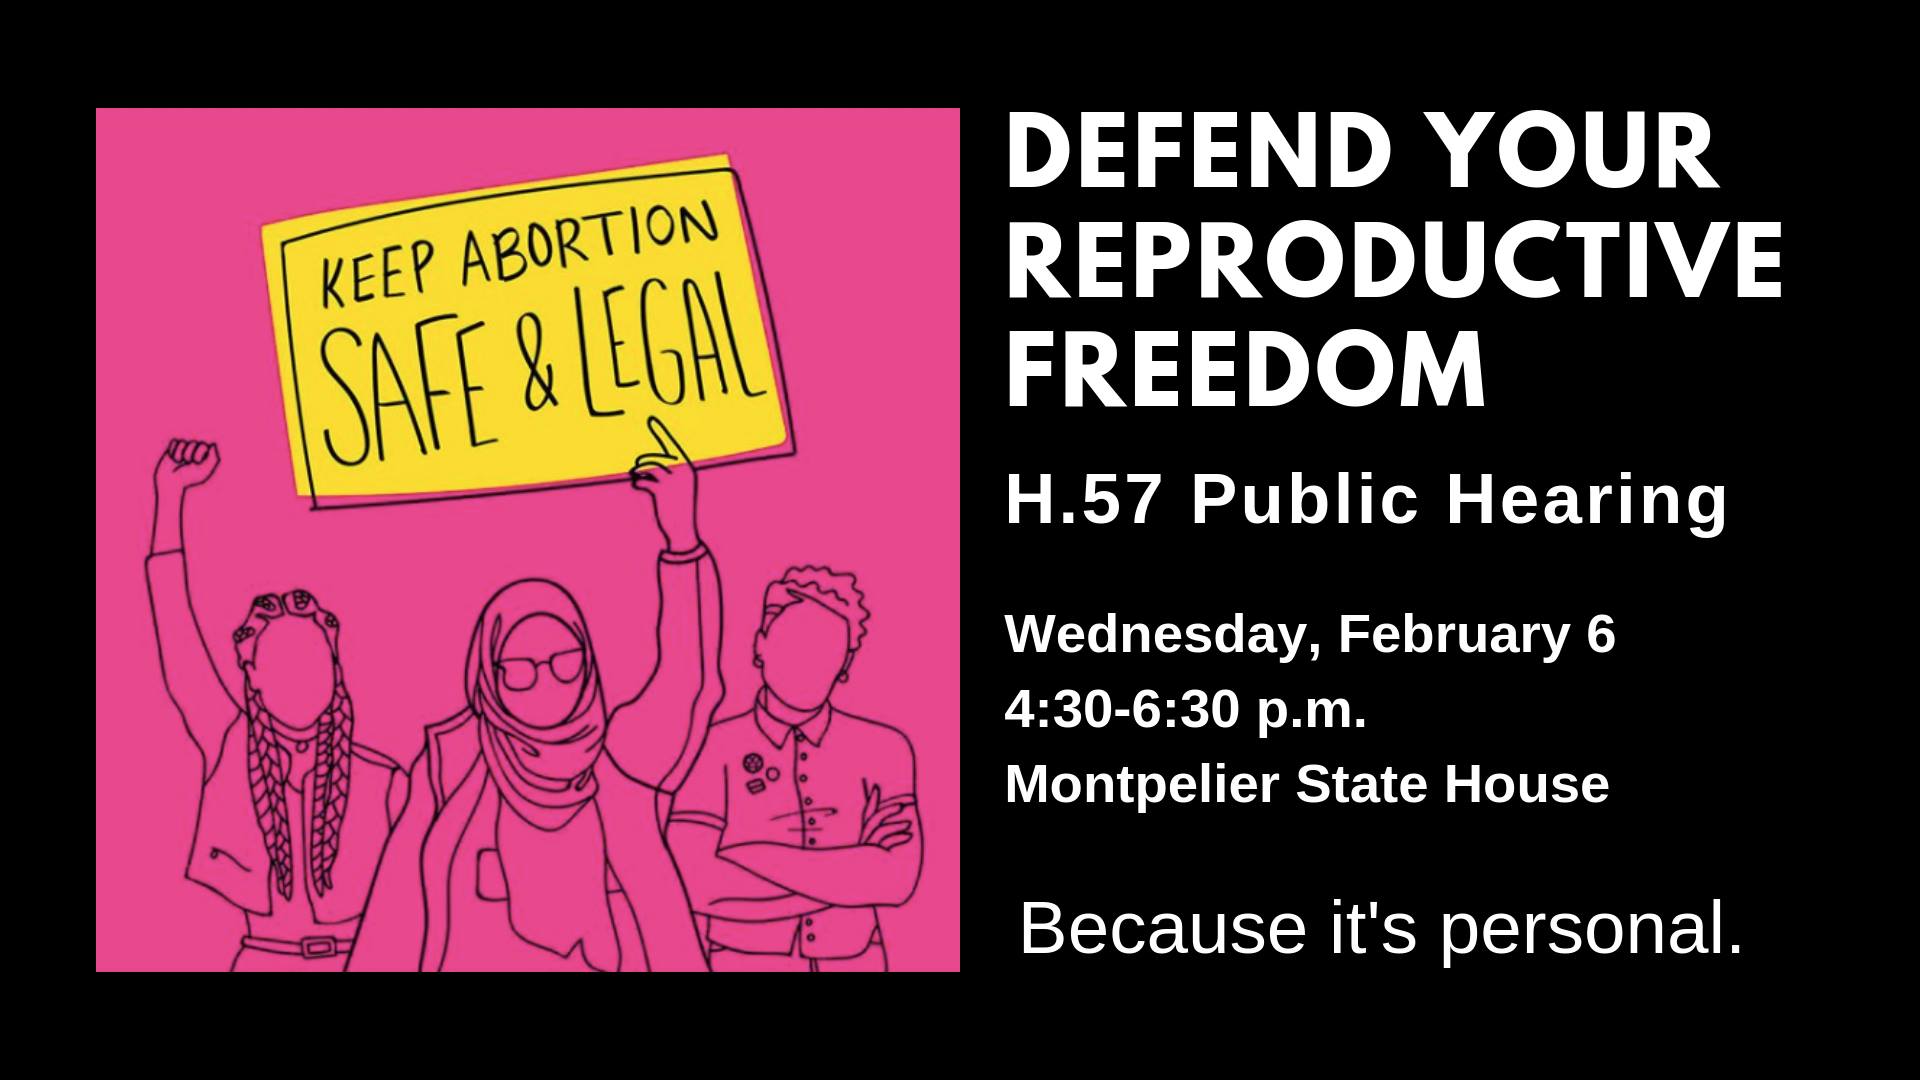 Defend your Reproductive Freedom h.57 public hearing Wed Feb 6 4:30 to 6:30 pm Montpelier Statehouse